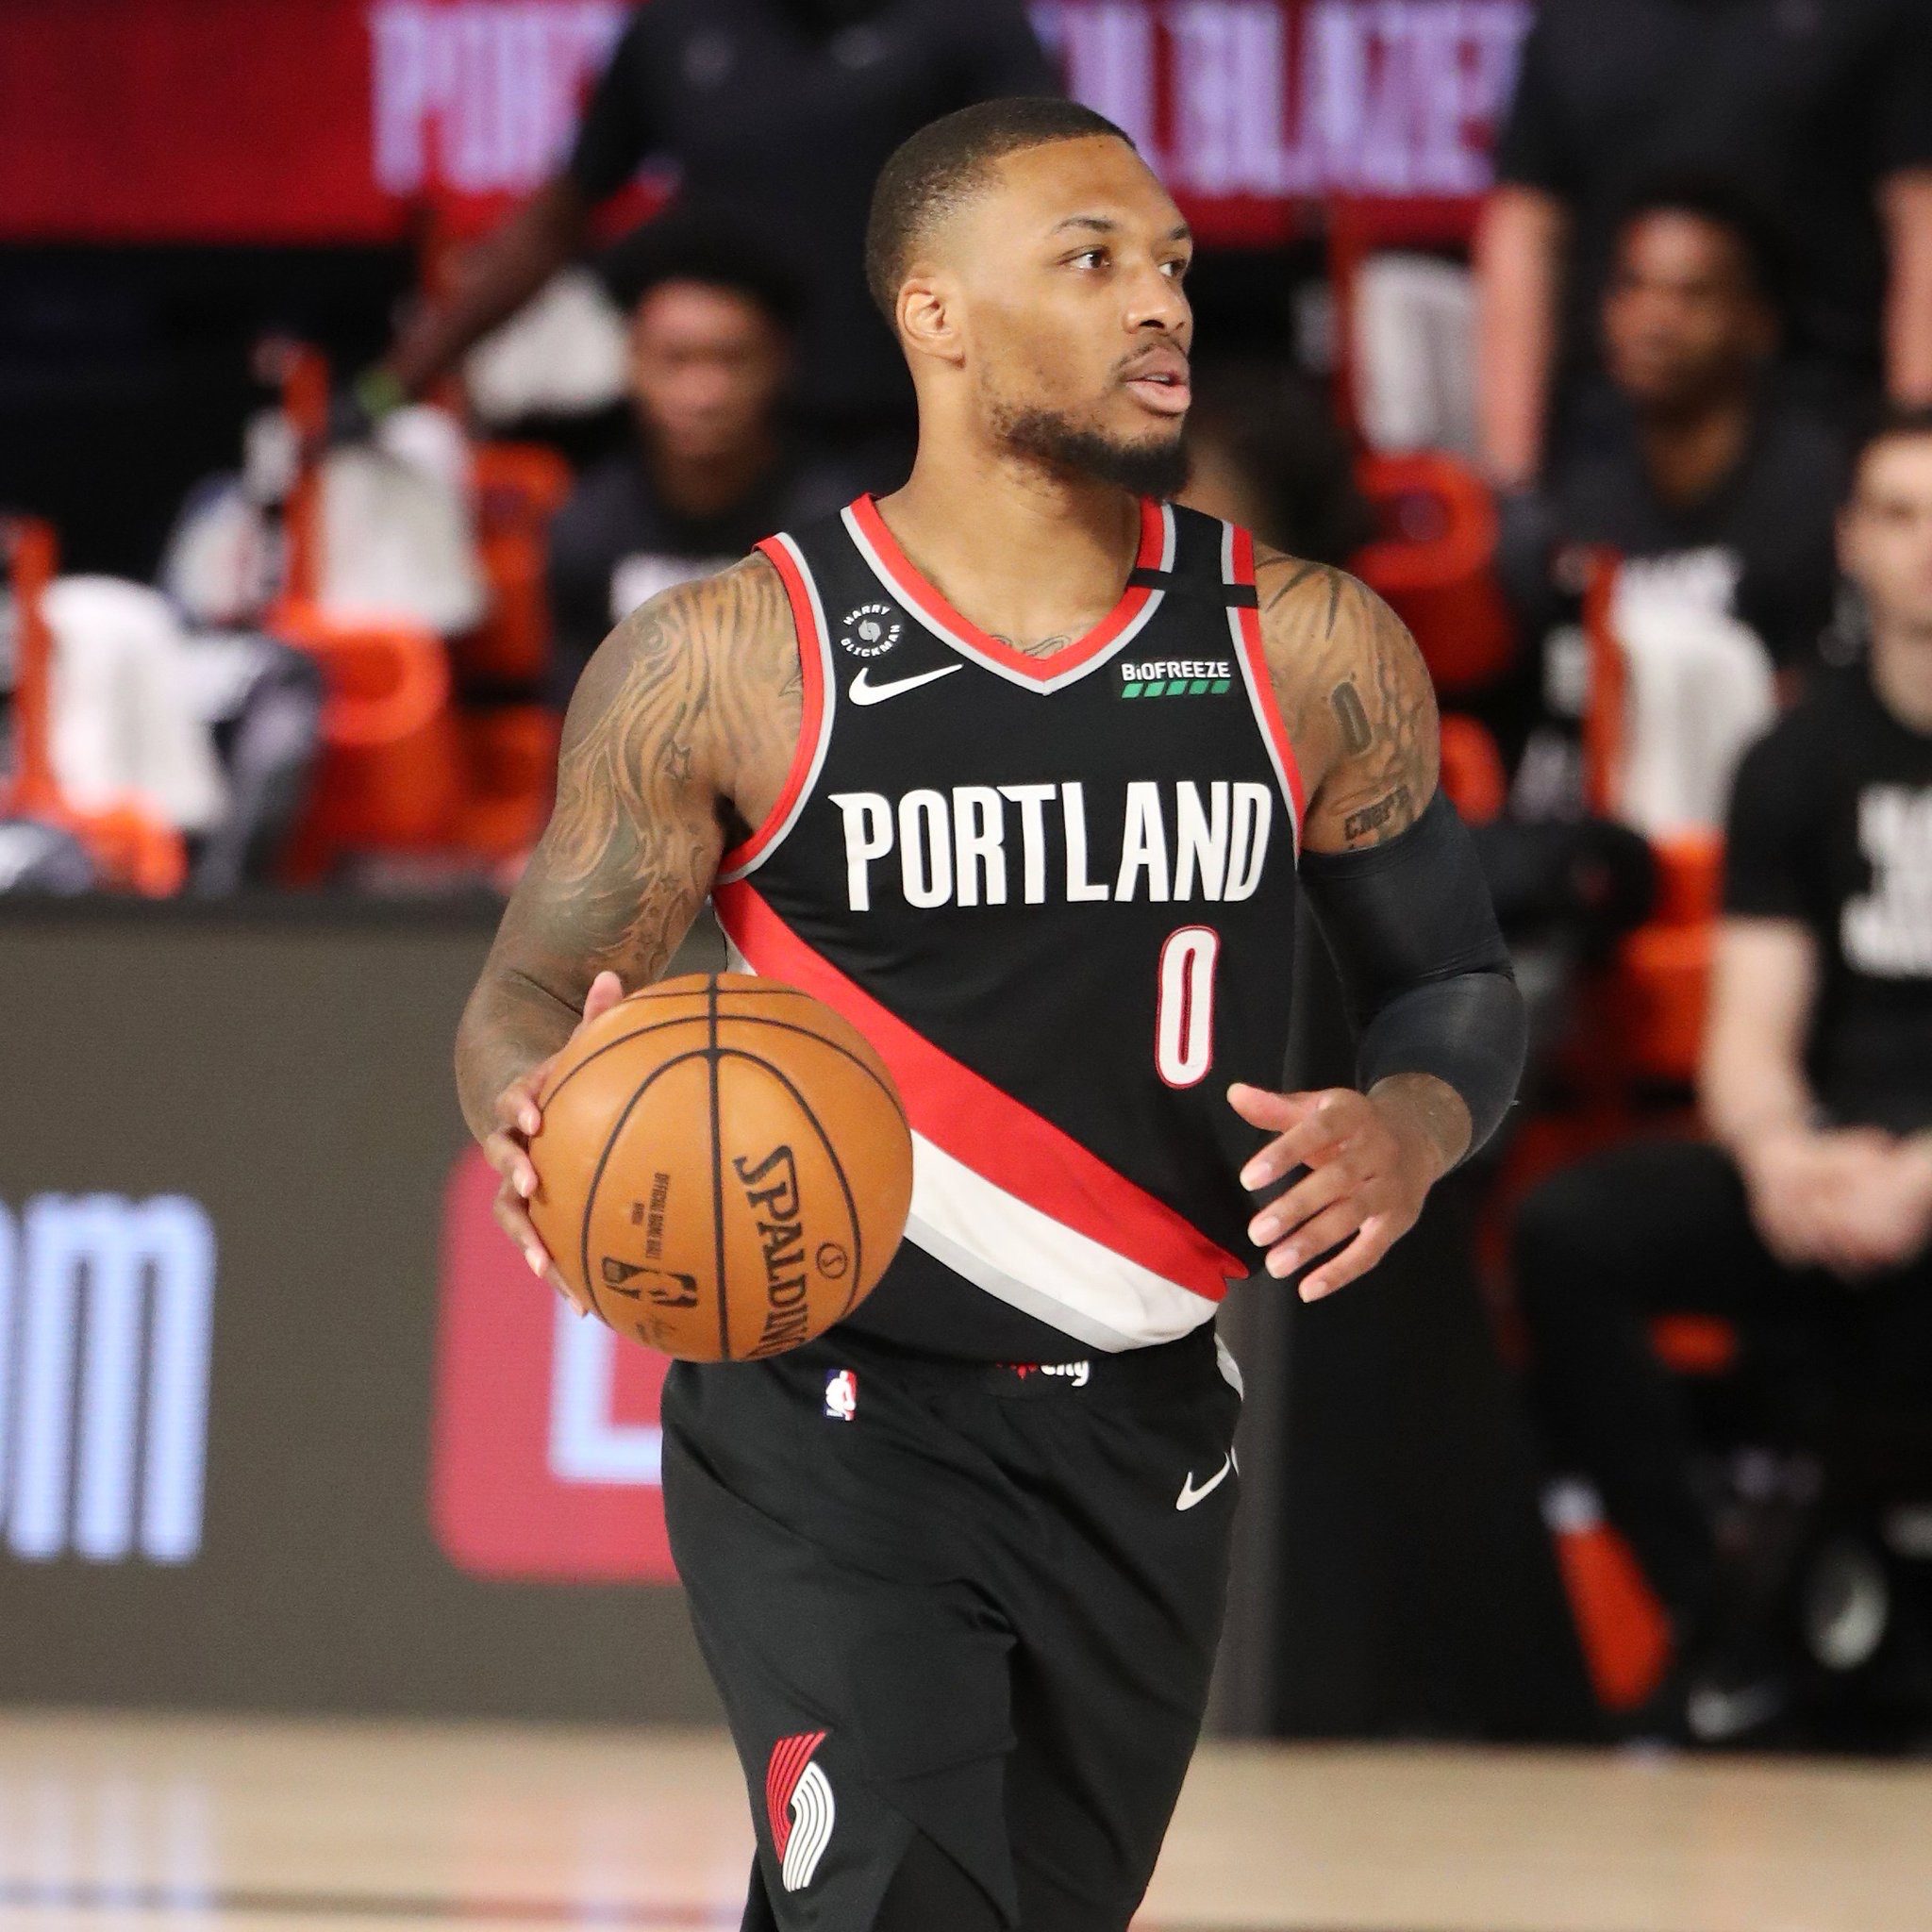 Injured Blazers star Lillard vows to play on against Lakers